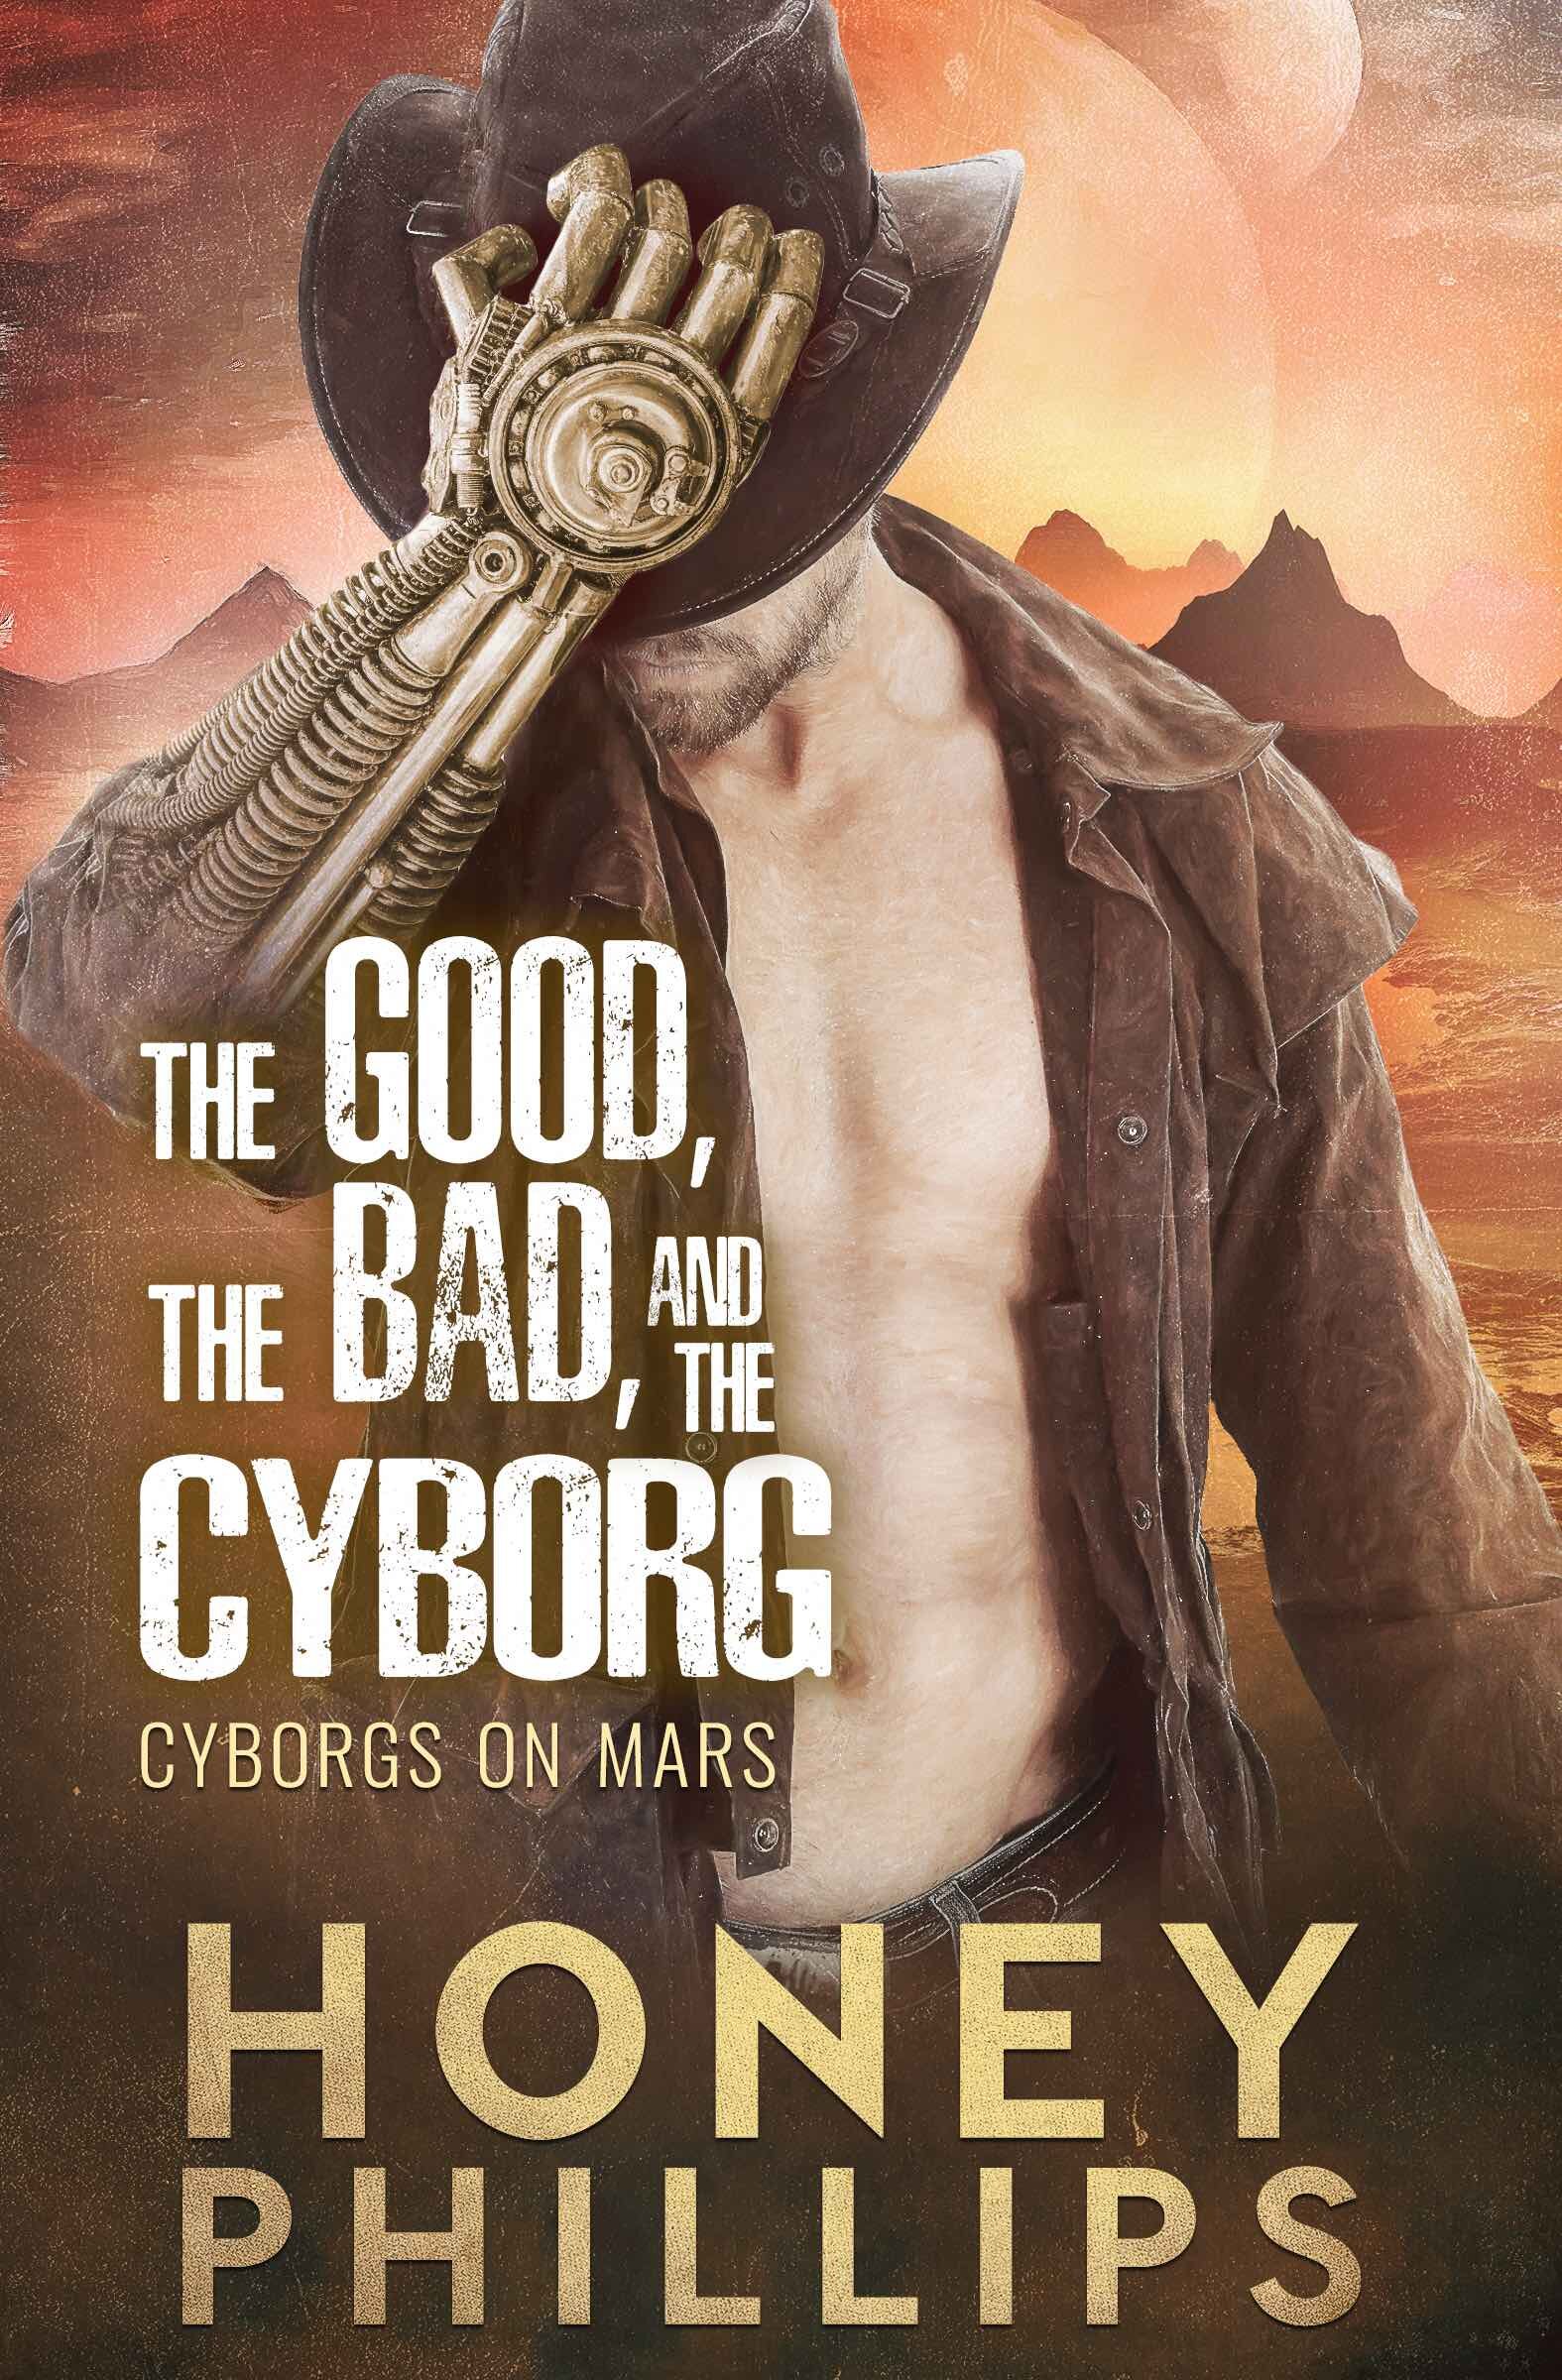 The-Good-the-Bad-and-the-Cyborg.jpg